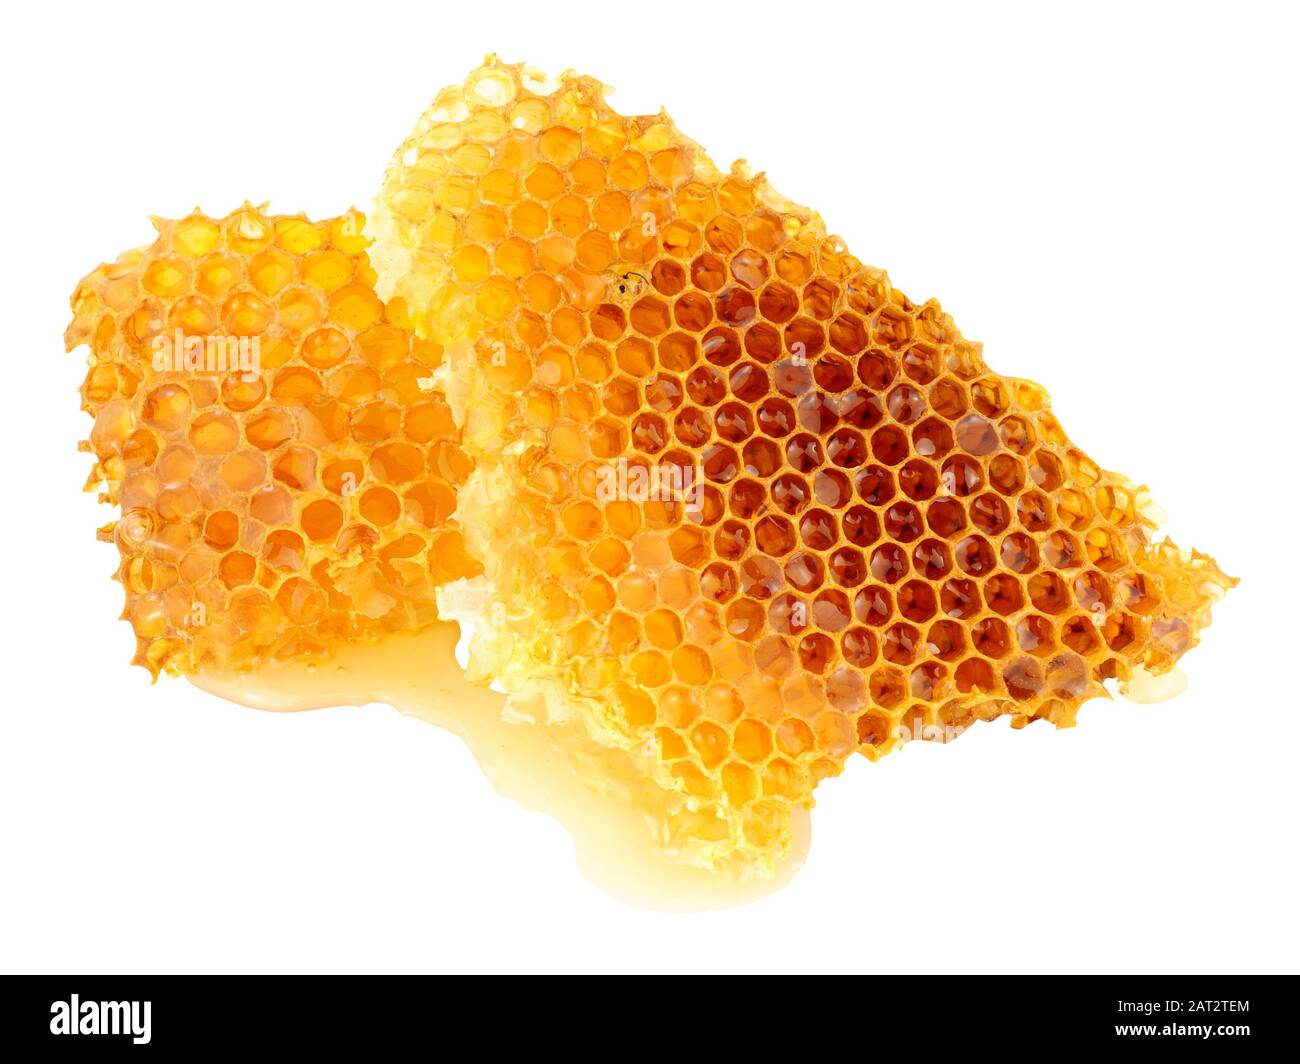 Honey bee wax honeycomb cells with honey isolated on a white background  Stock Photo - Alamy